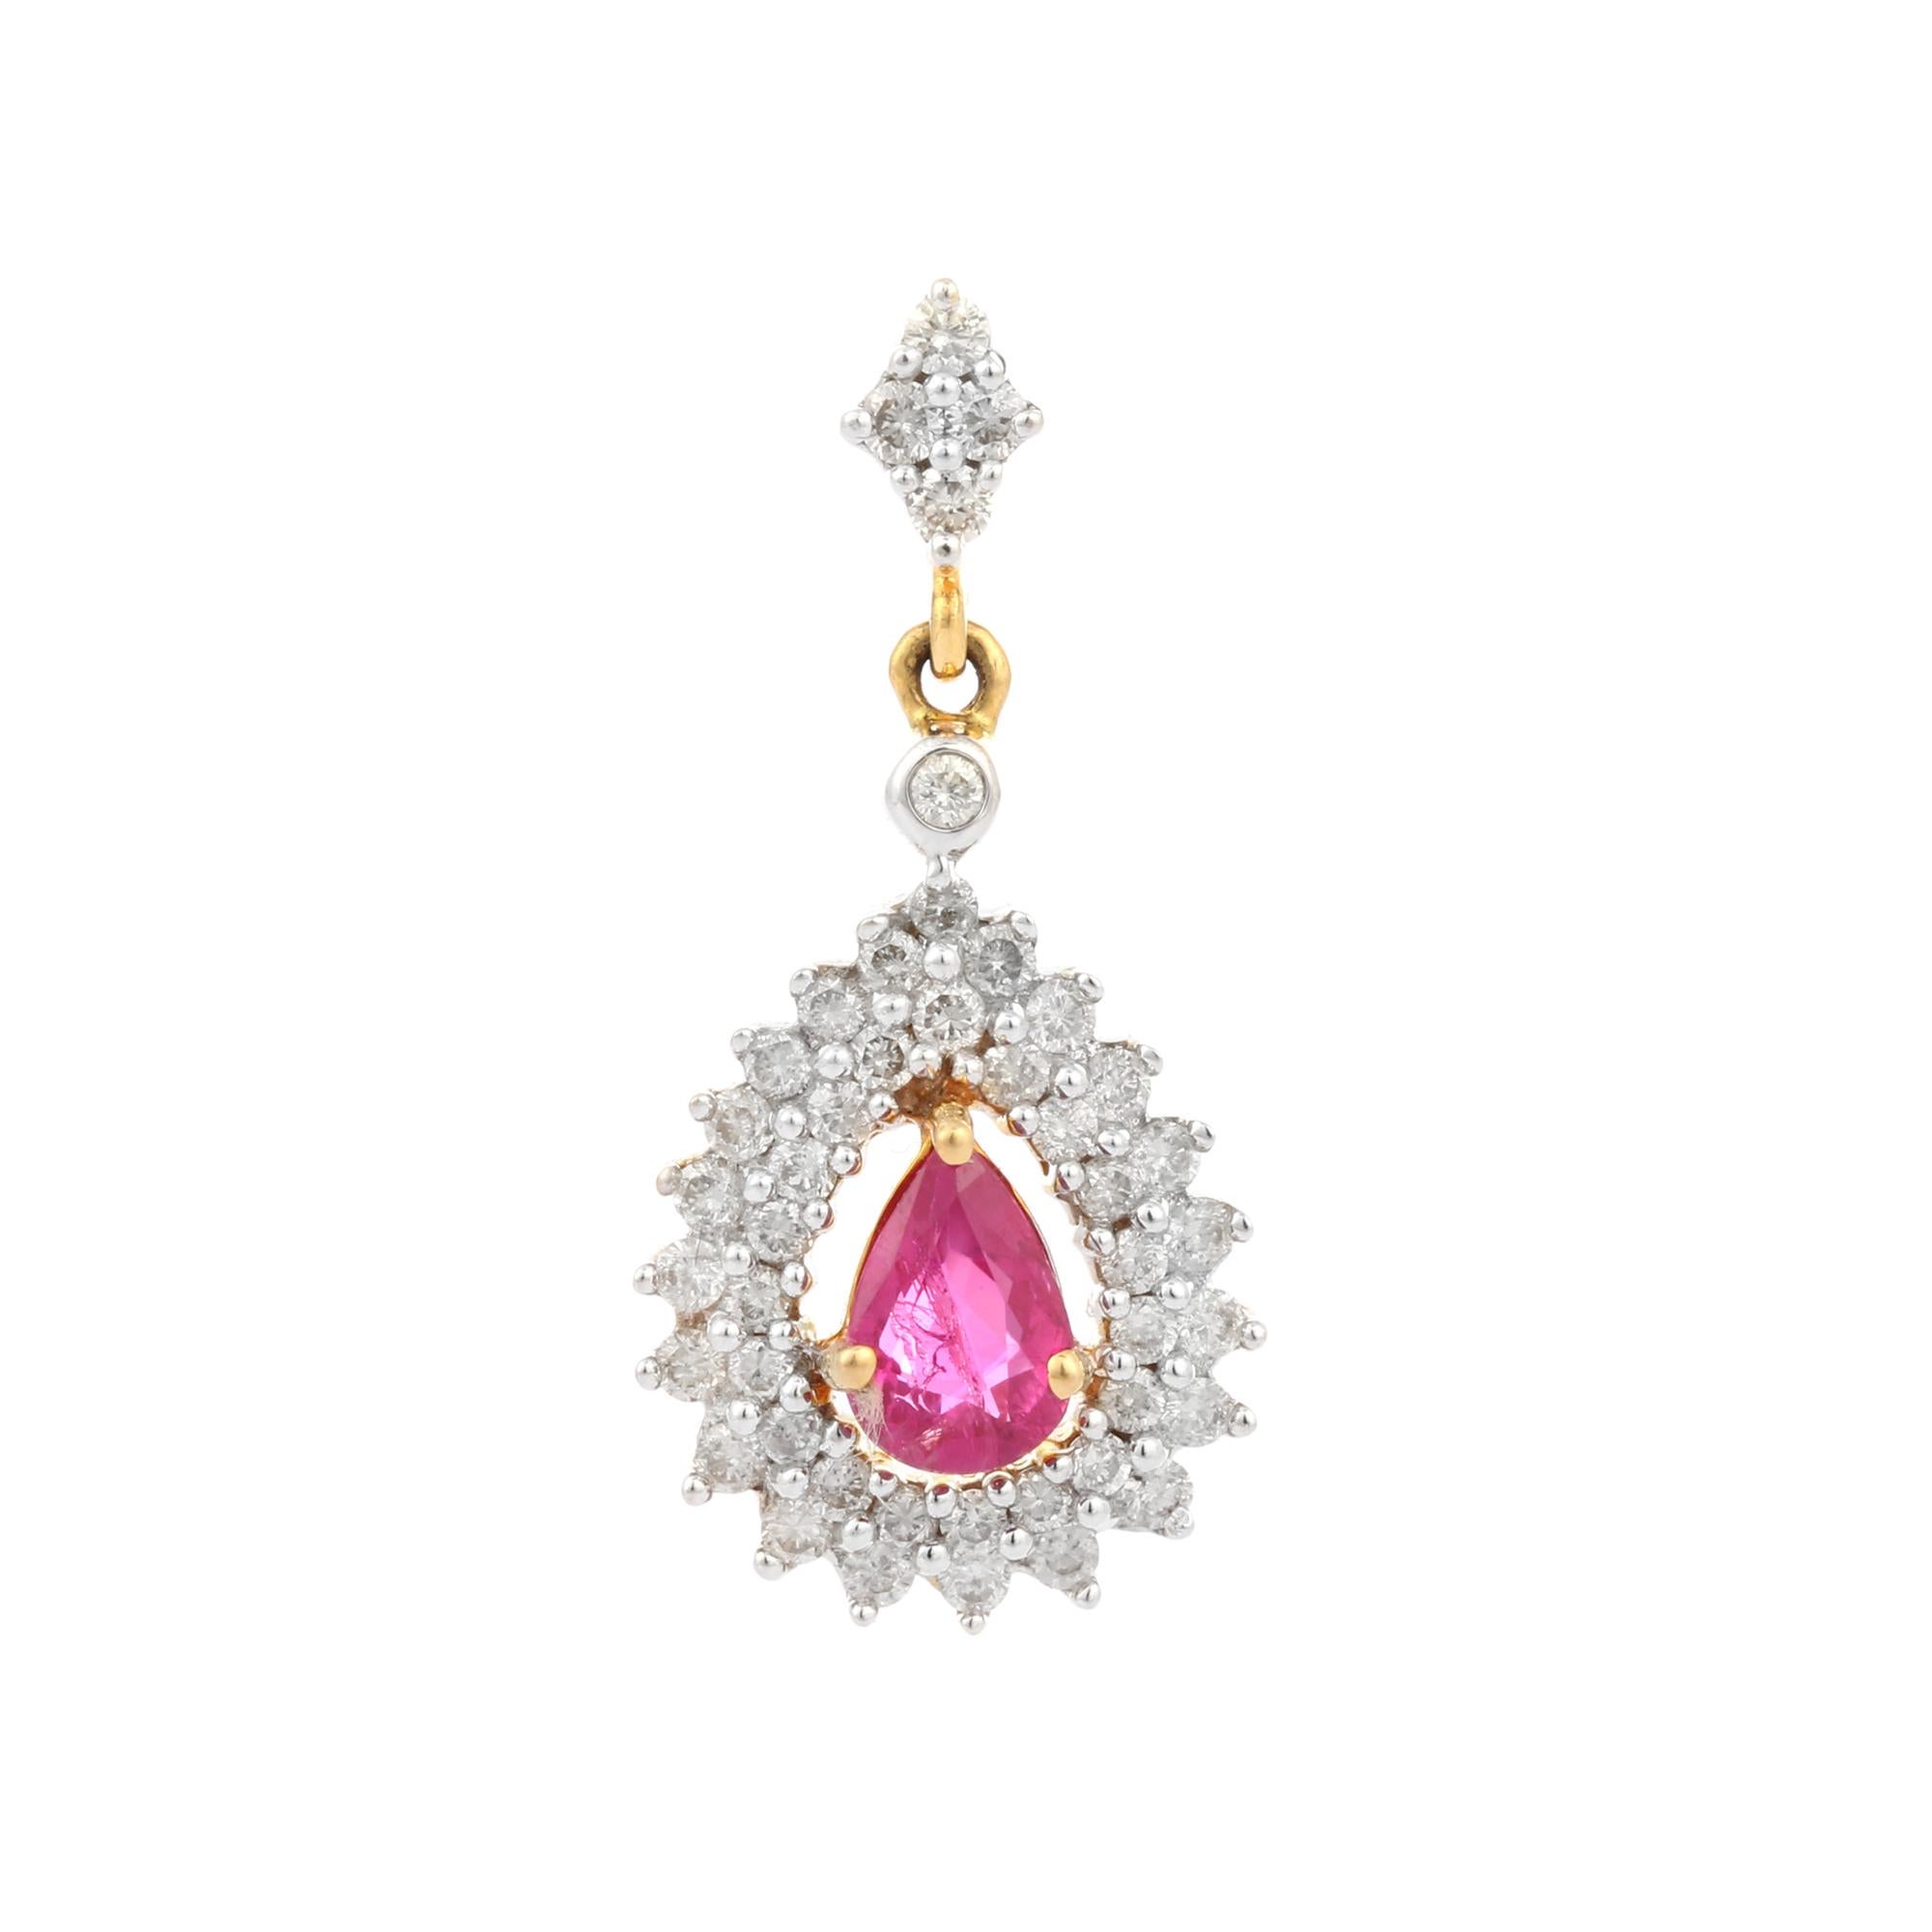 Natural Pear Ruby with Halo Diamond Wedding Pendant in 18K Gold. It has a pear cut ruby with diamonds that completes your look with a decent touch. Pendants are used to wear or gifted to represent love and promises. It's an attractive jewelry piece